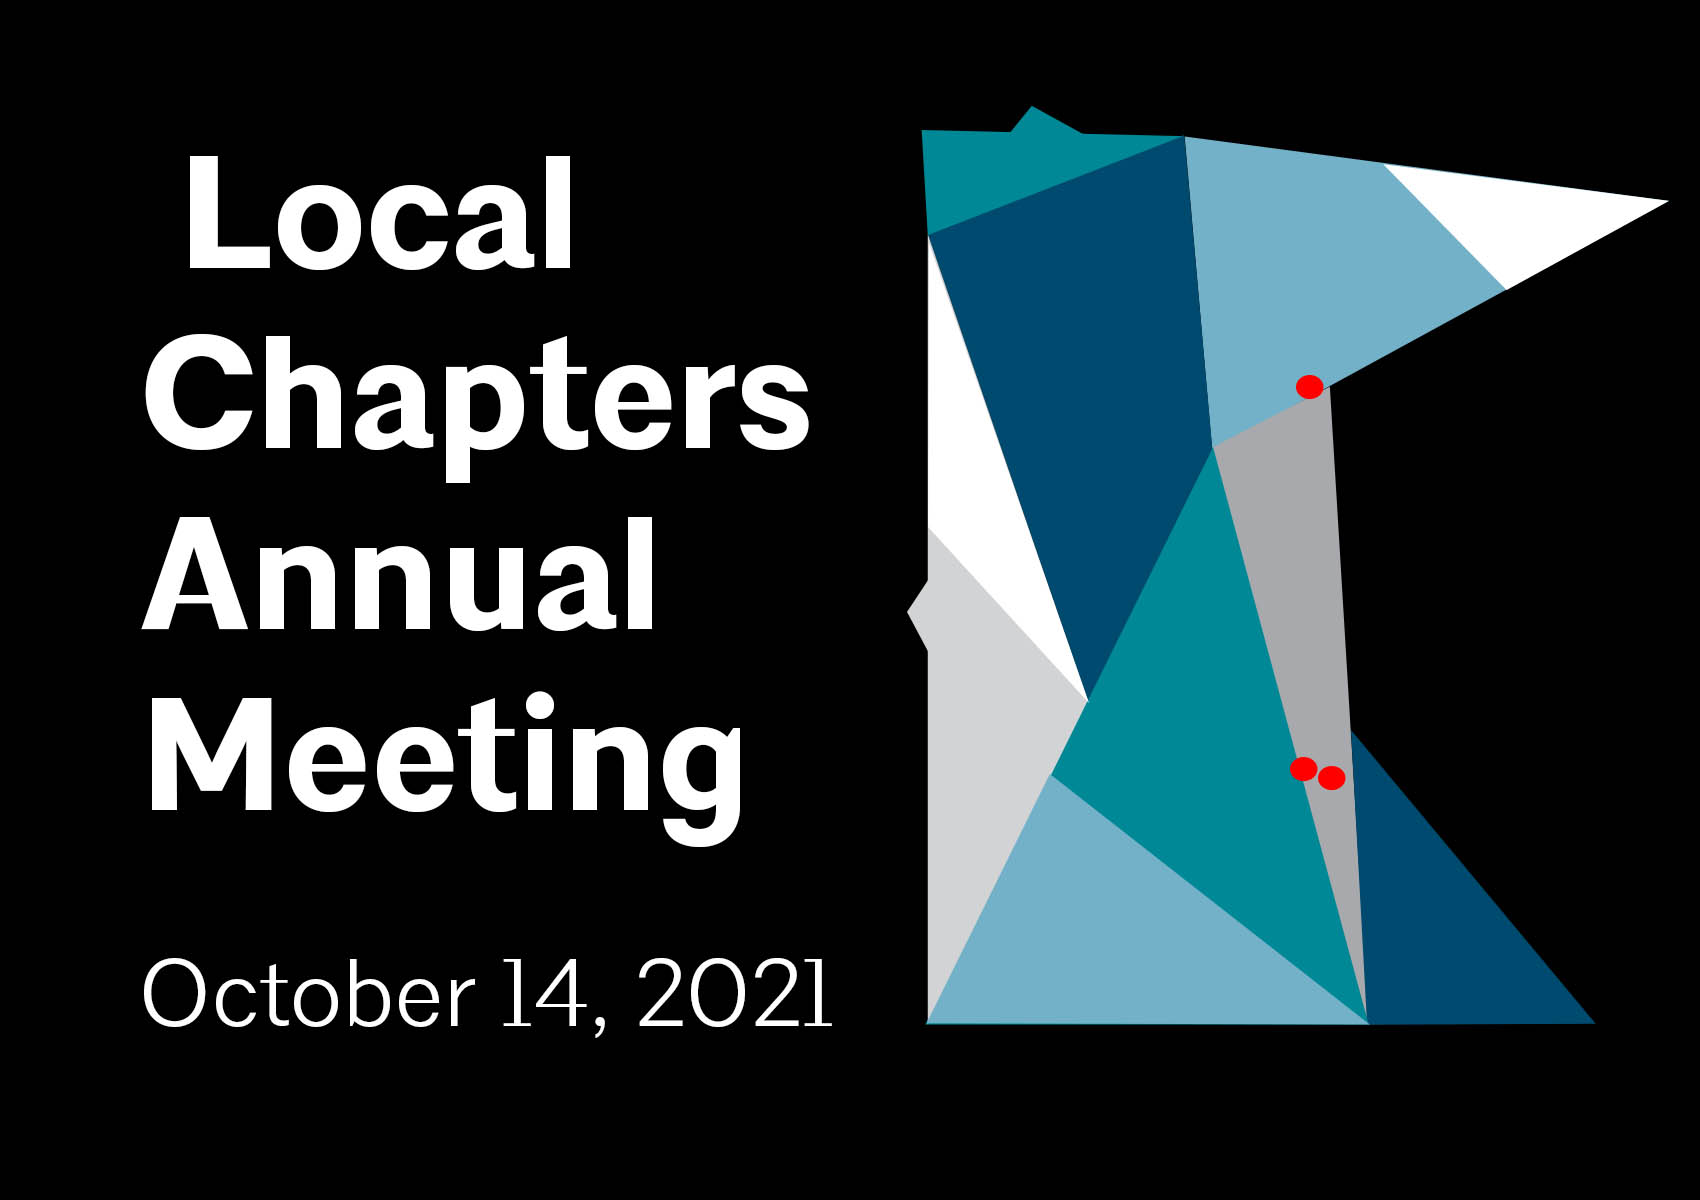 Local Chapters Annual Meeting